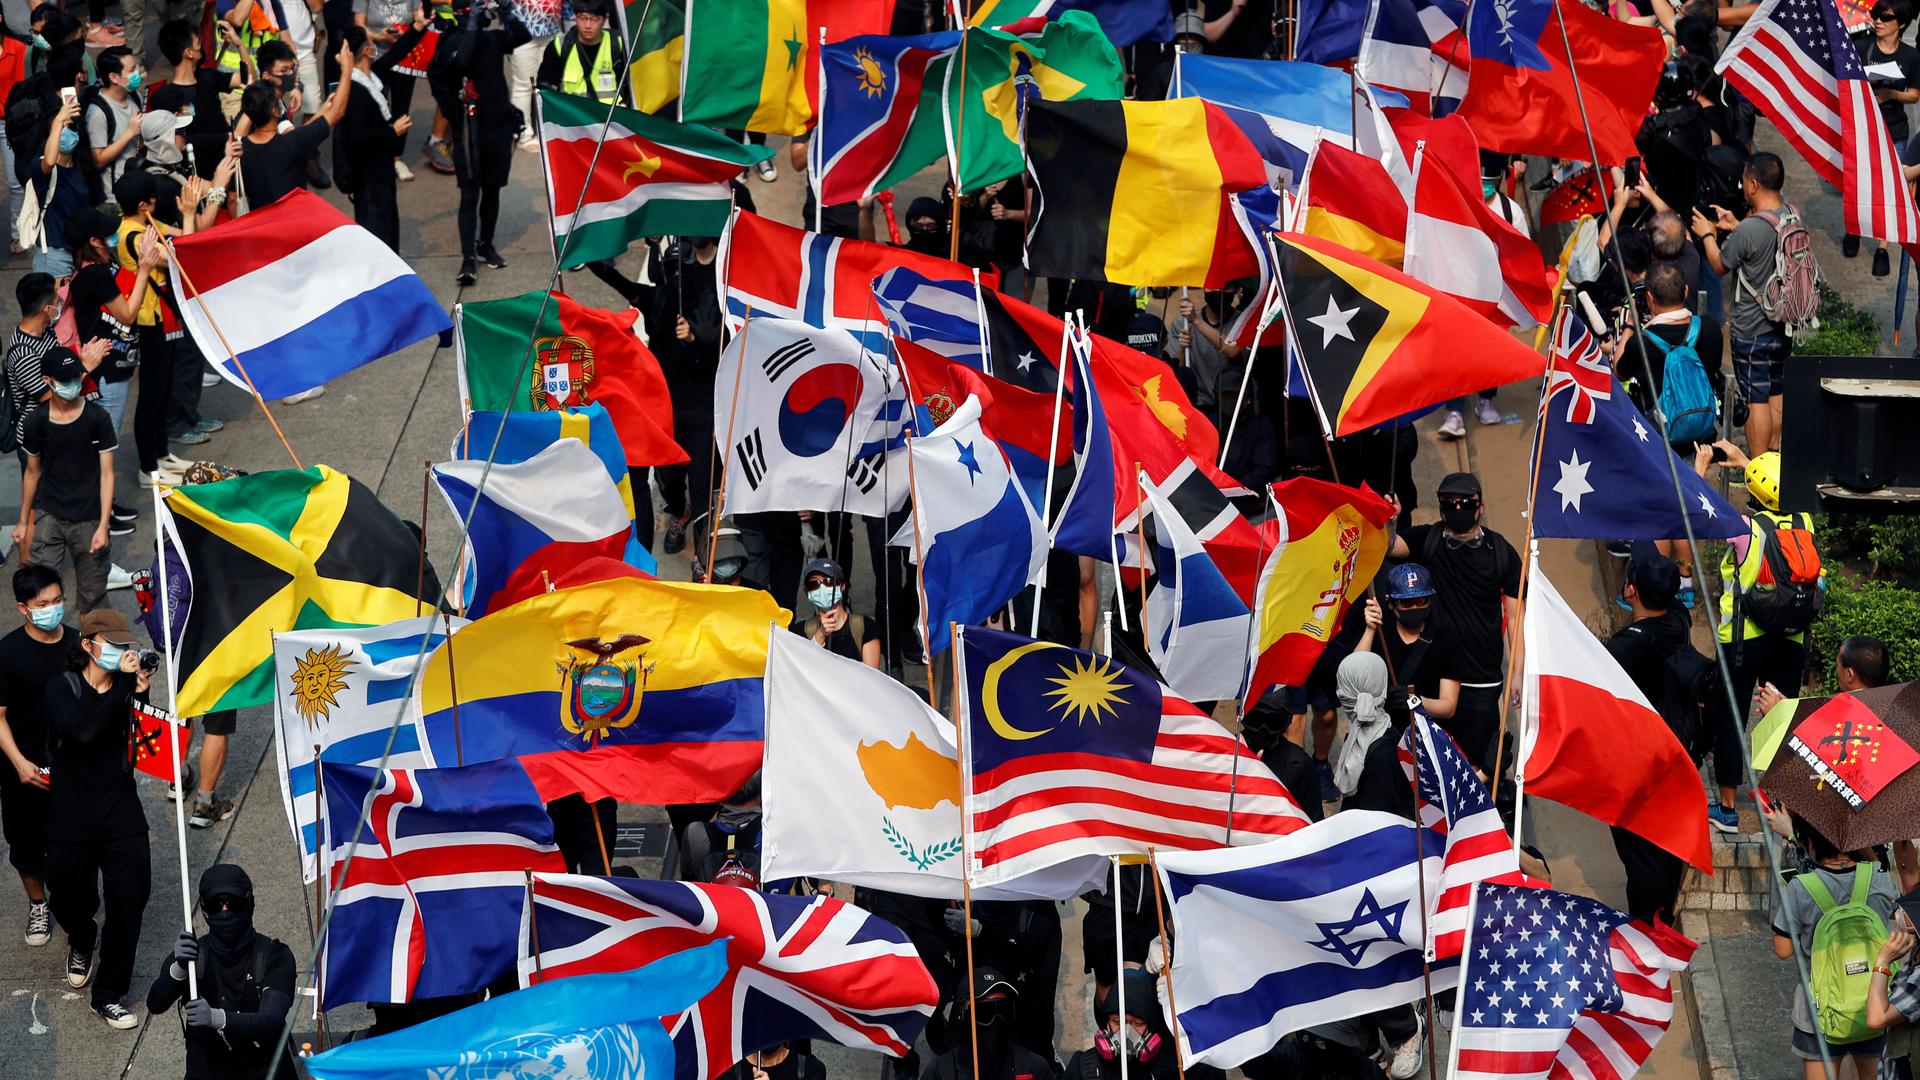 Flags of many countries carried by protesters fill the frame. 